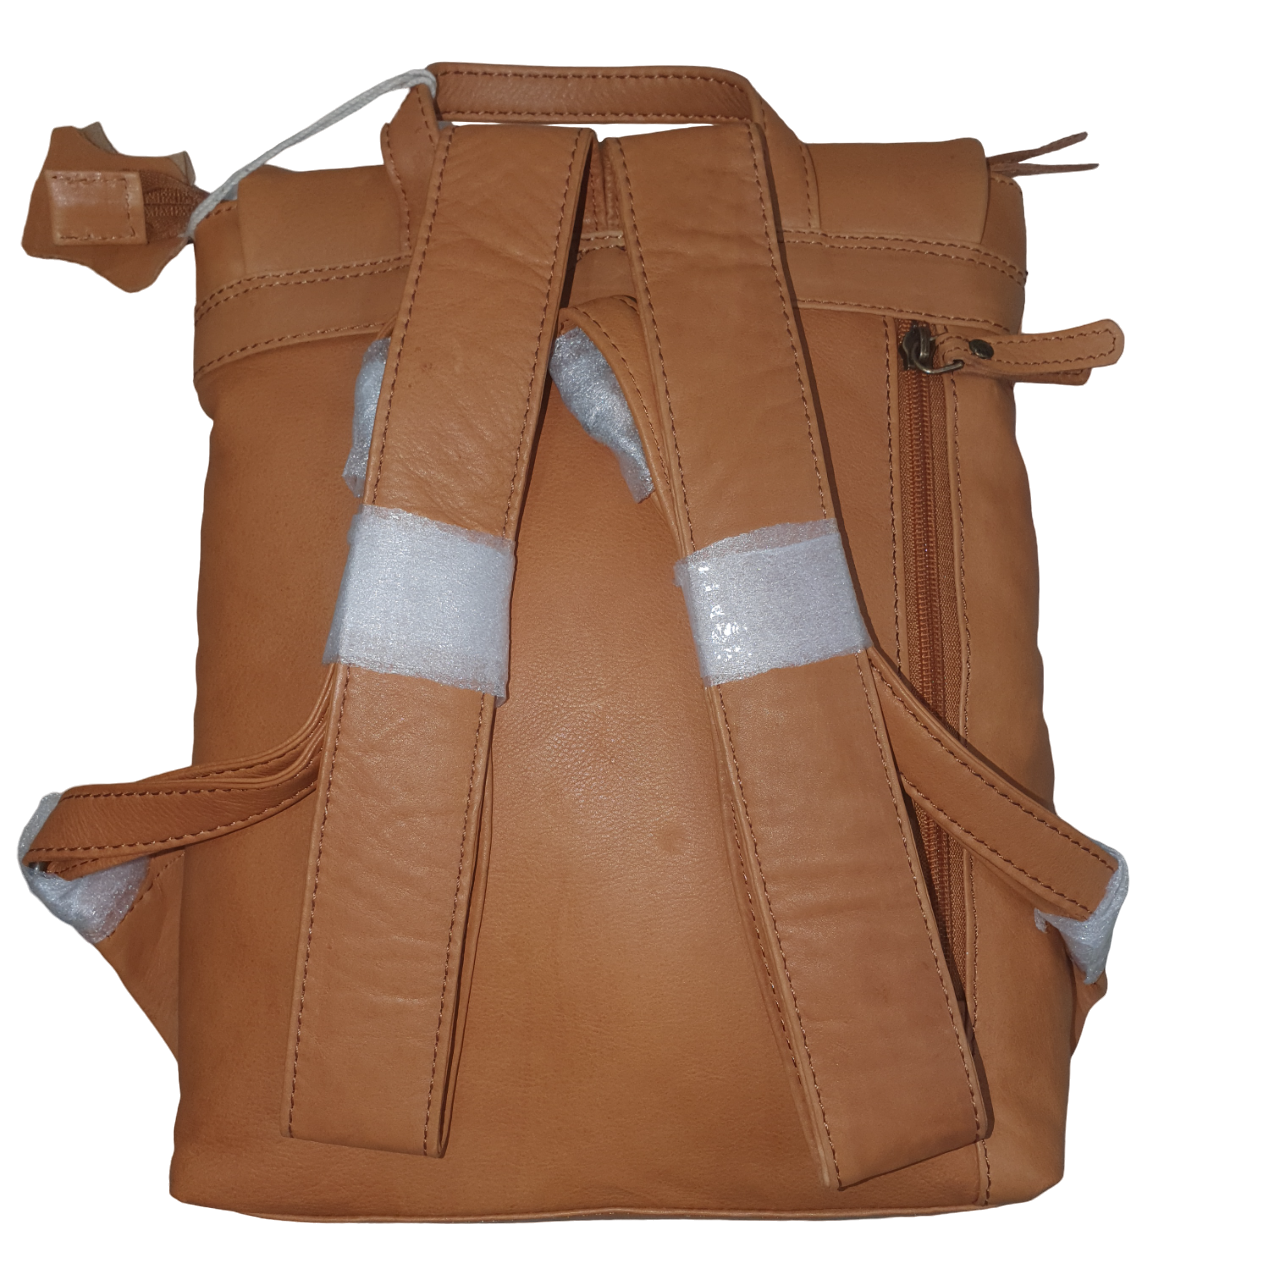 Rugged Hide - Leather Backpack RH-470 Jeany - Tan